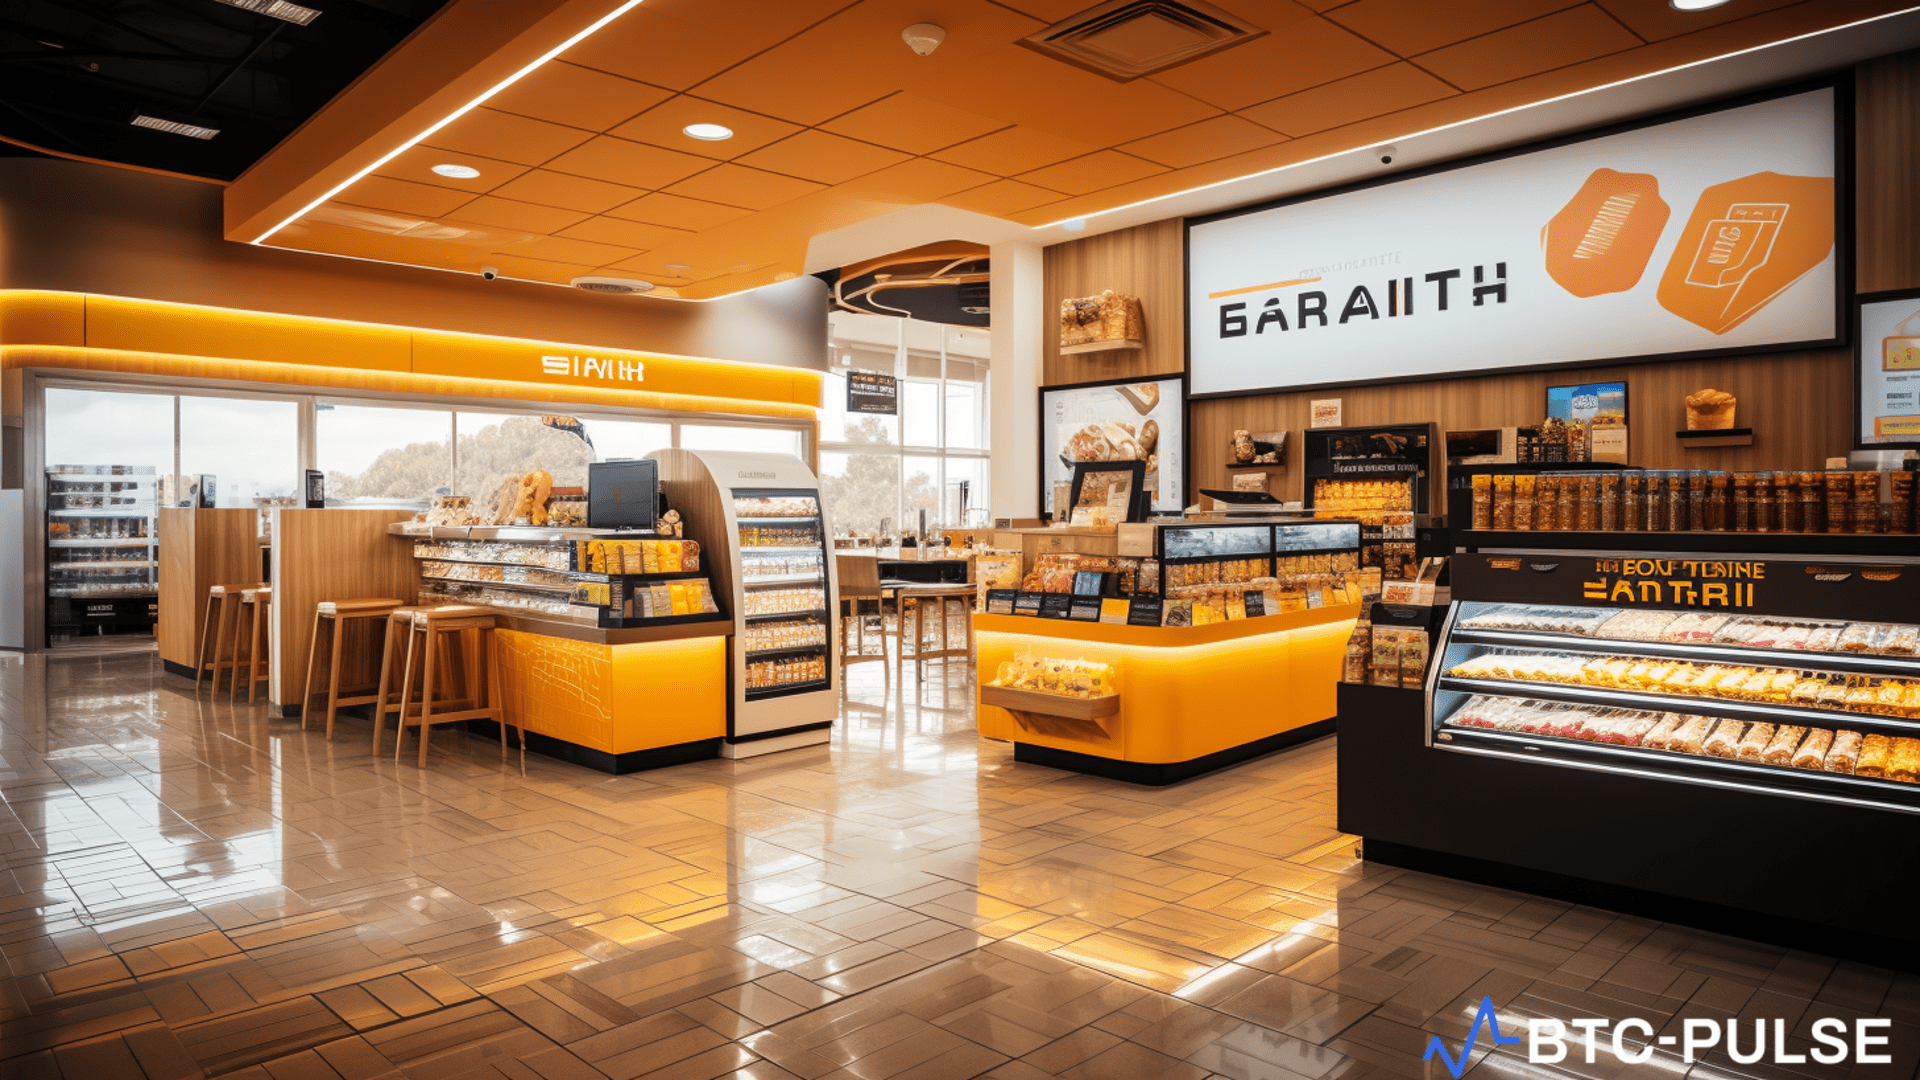 Emart24 Launches Bitcoin-Themed Meal Box in South Korea with Bithumb Collaboration